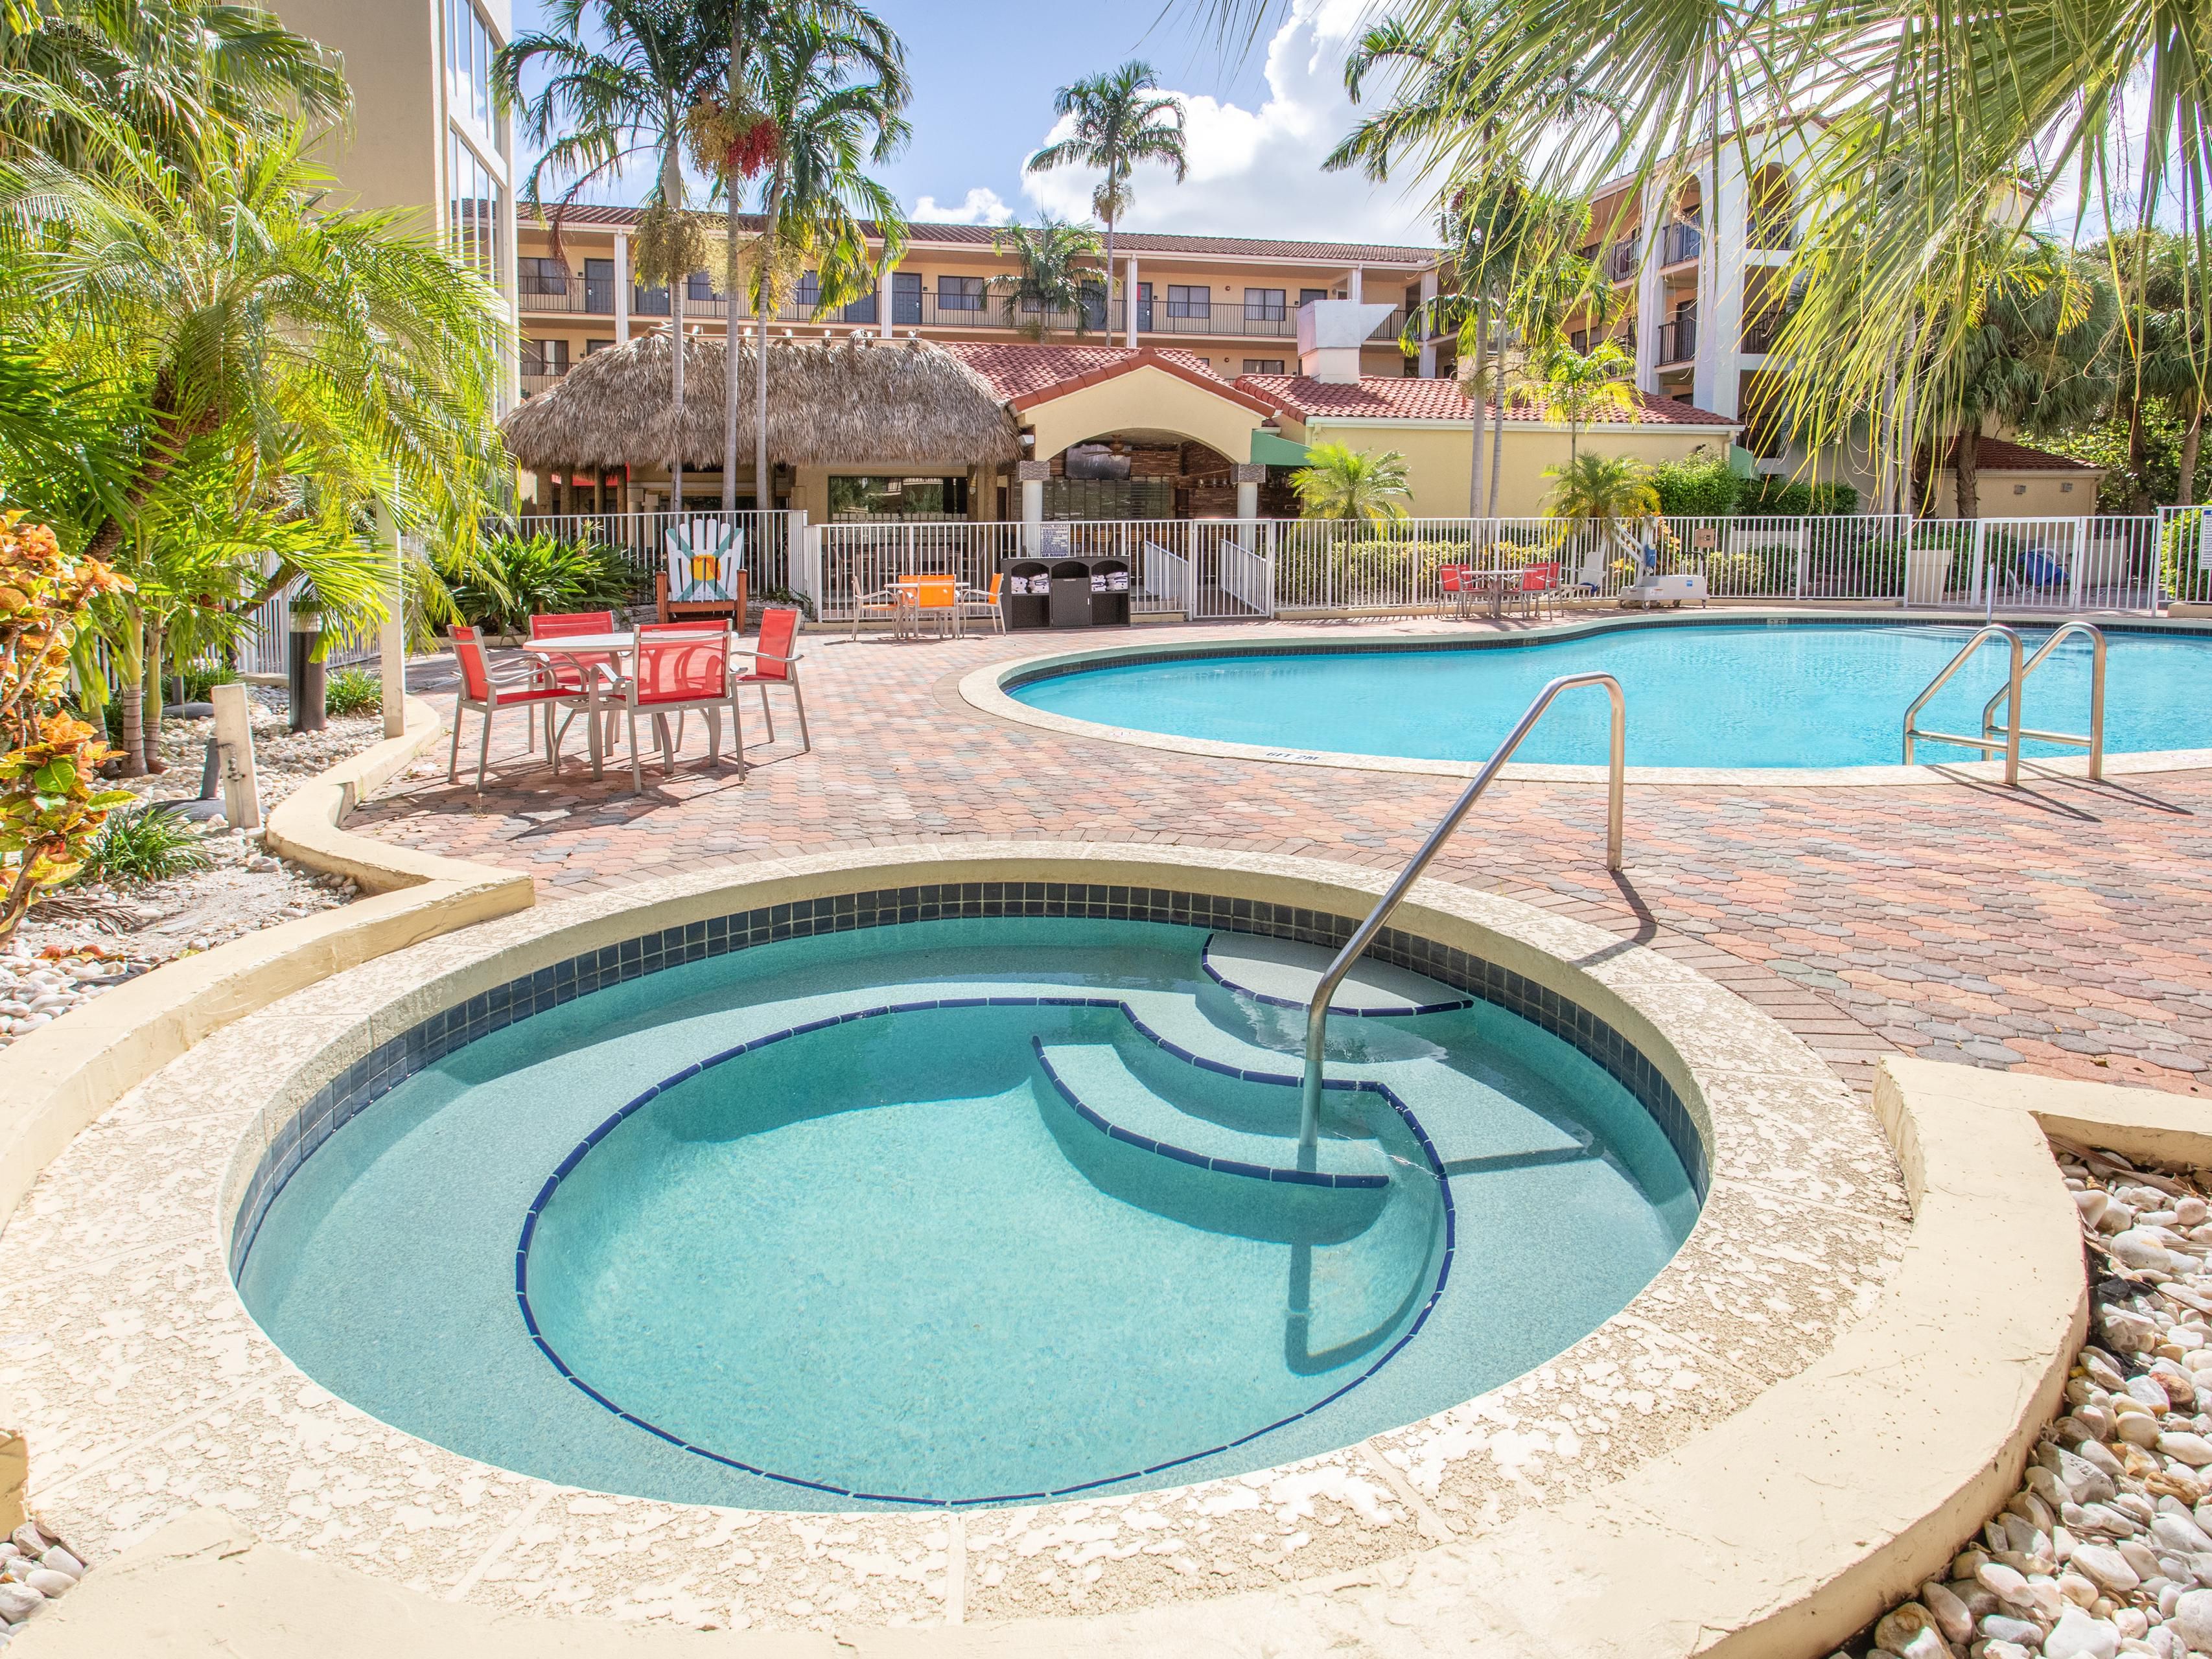 Welcome to our beautiful Tropical Pool and Whirlpool to enjoy on your trip to Boca Raton so you can leave all your worries behind and just relax in the Florida Sunshine.